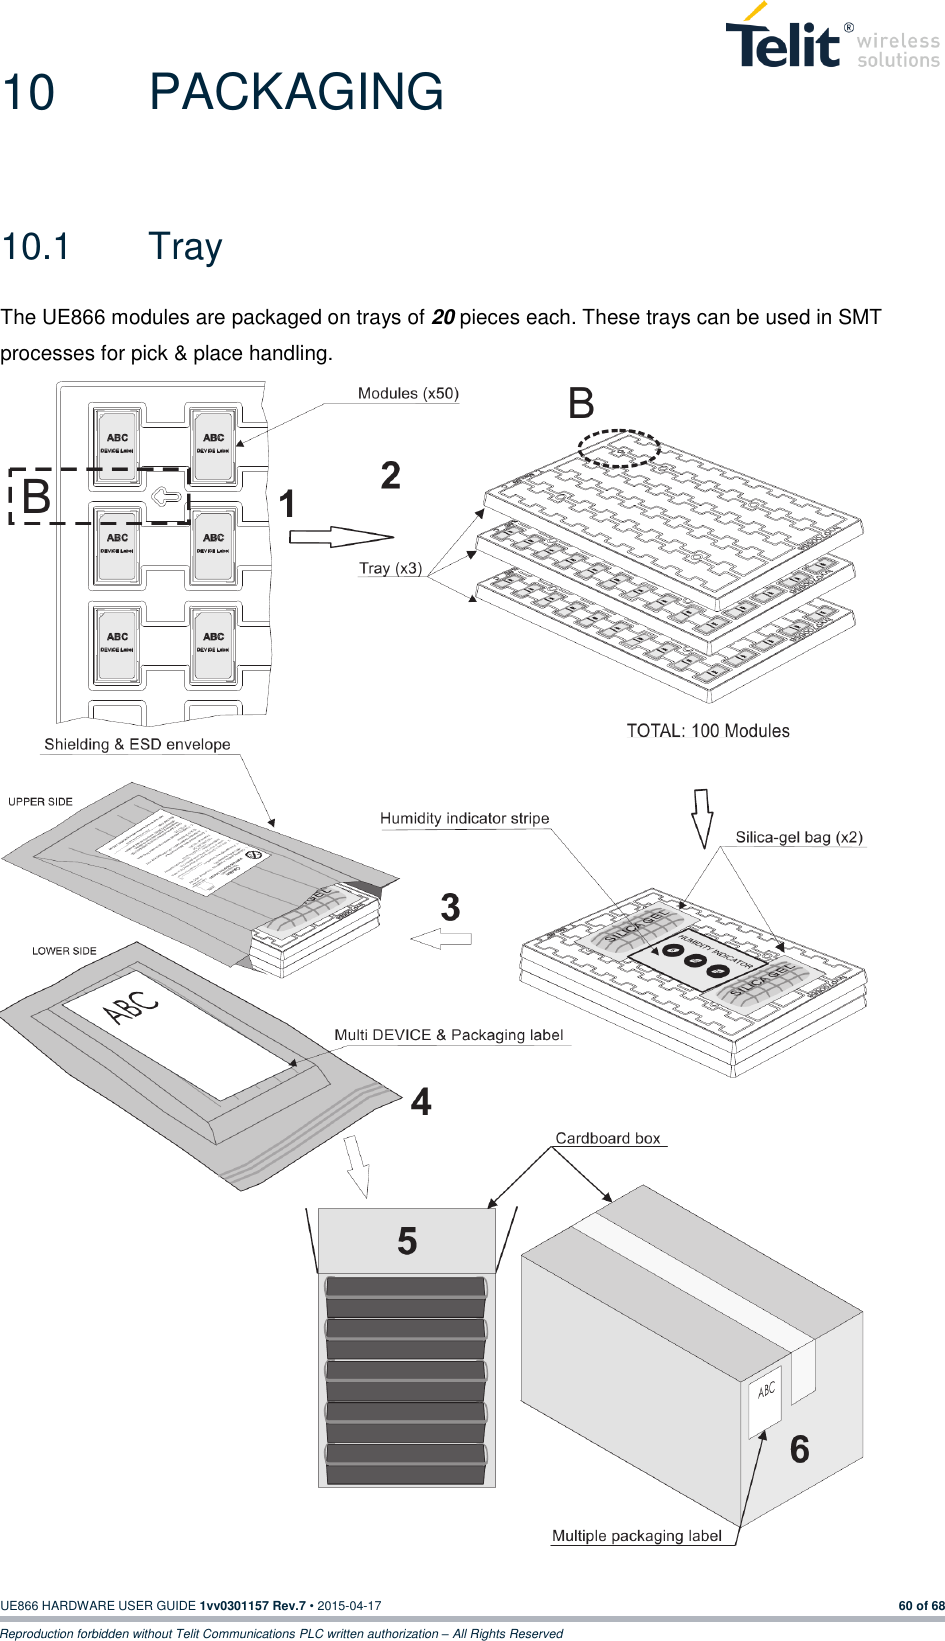  UE866 HARDWARE USER GUIDE 1vv0301157 Rev.7 • 2015-04-17 60 of 68 Reproduction forbidden without Telit Communications PLC written authorization – All Rights Reserved 10  PACKAGING 10.1  Tray The UE866 modules are packaged on trays of 20 pieces each. These trays can be used in SMT processes for pick &amp; place handling.   